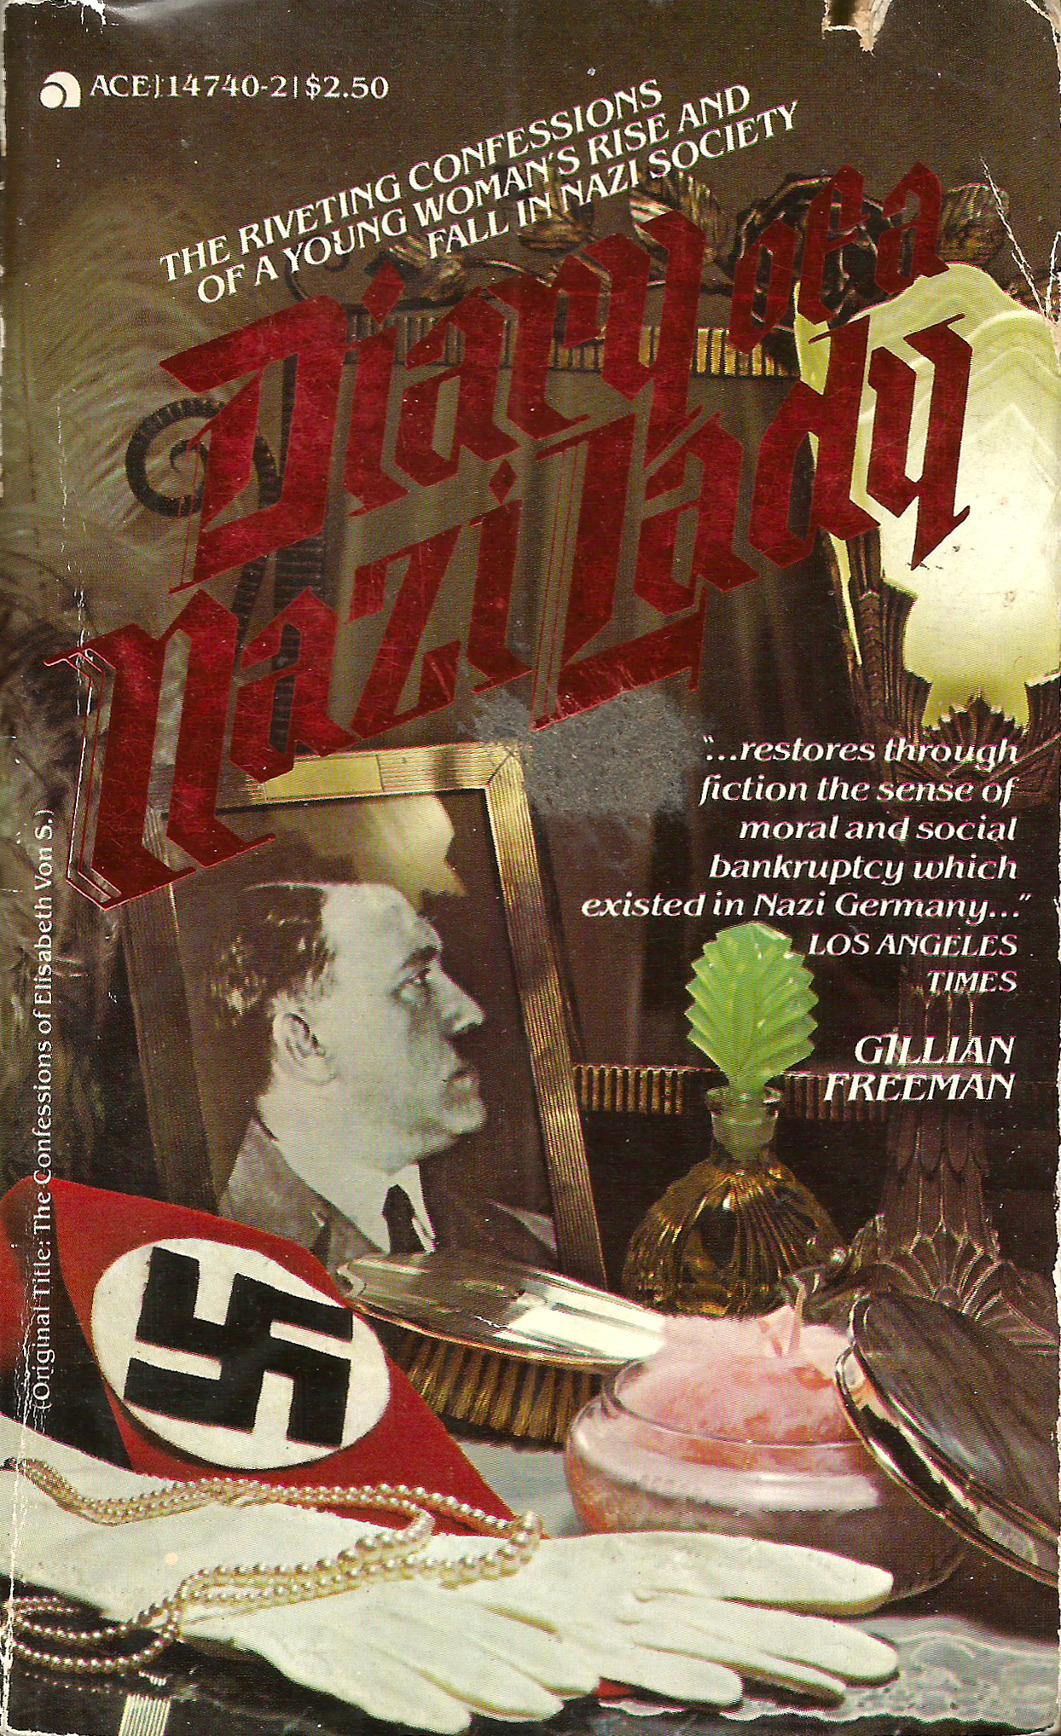 Diary of a Nazi Lady, by Gillian Freeman (Ace, 1979). From a charity shop in Nottingham.